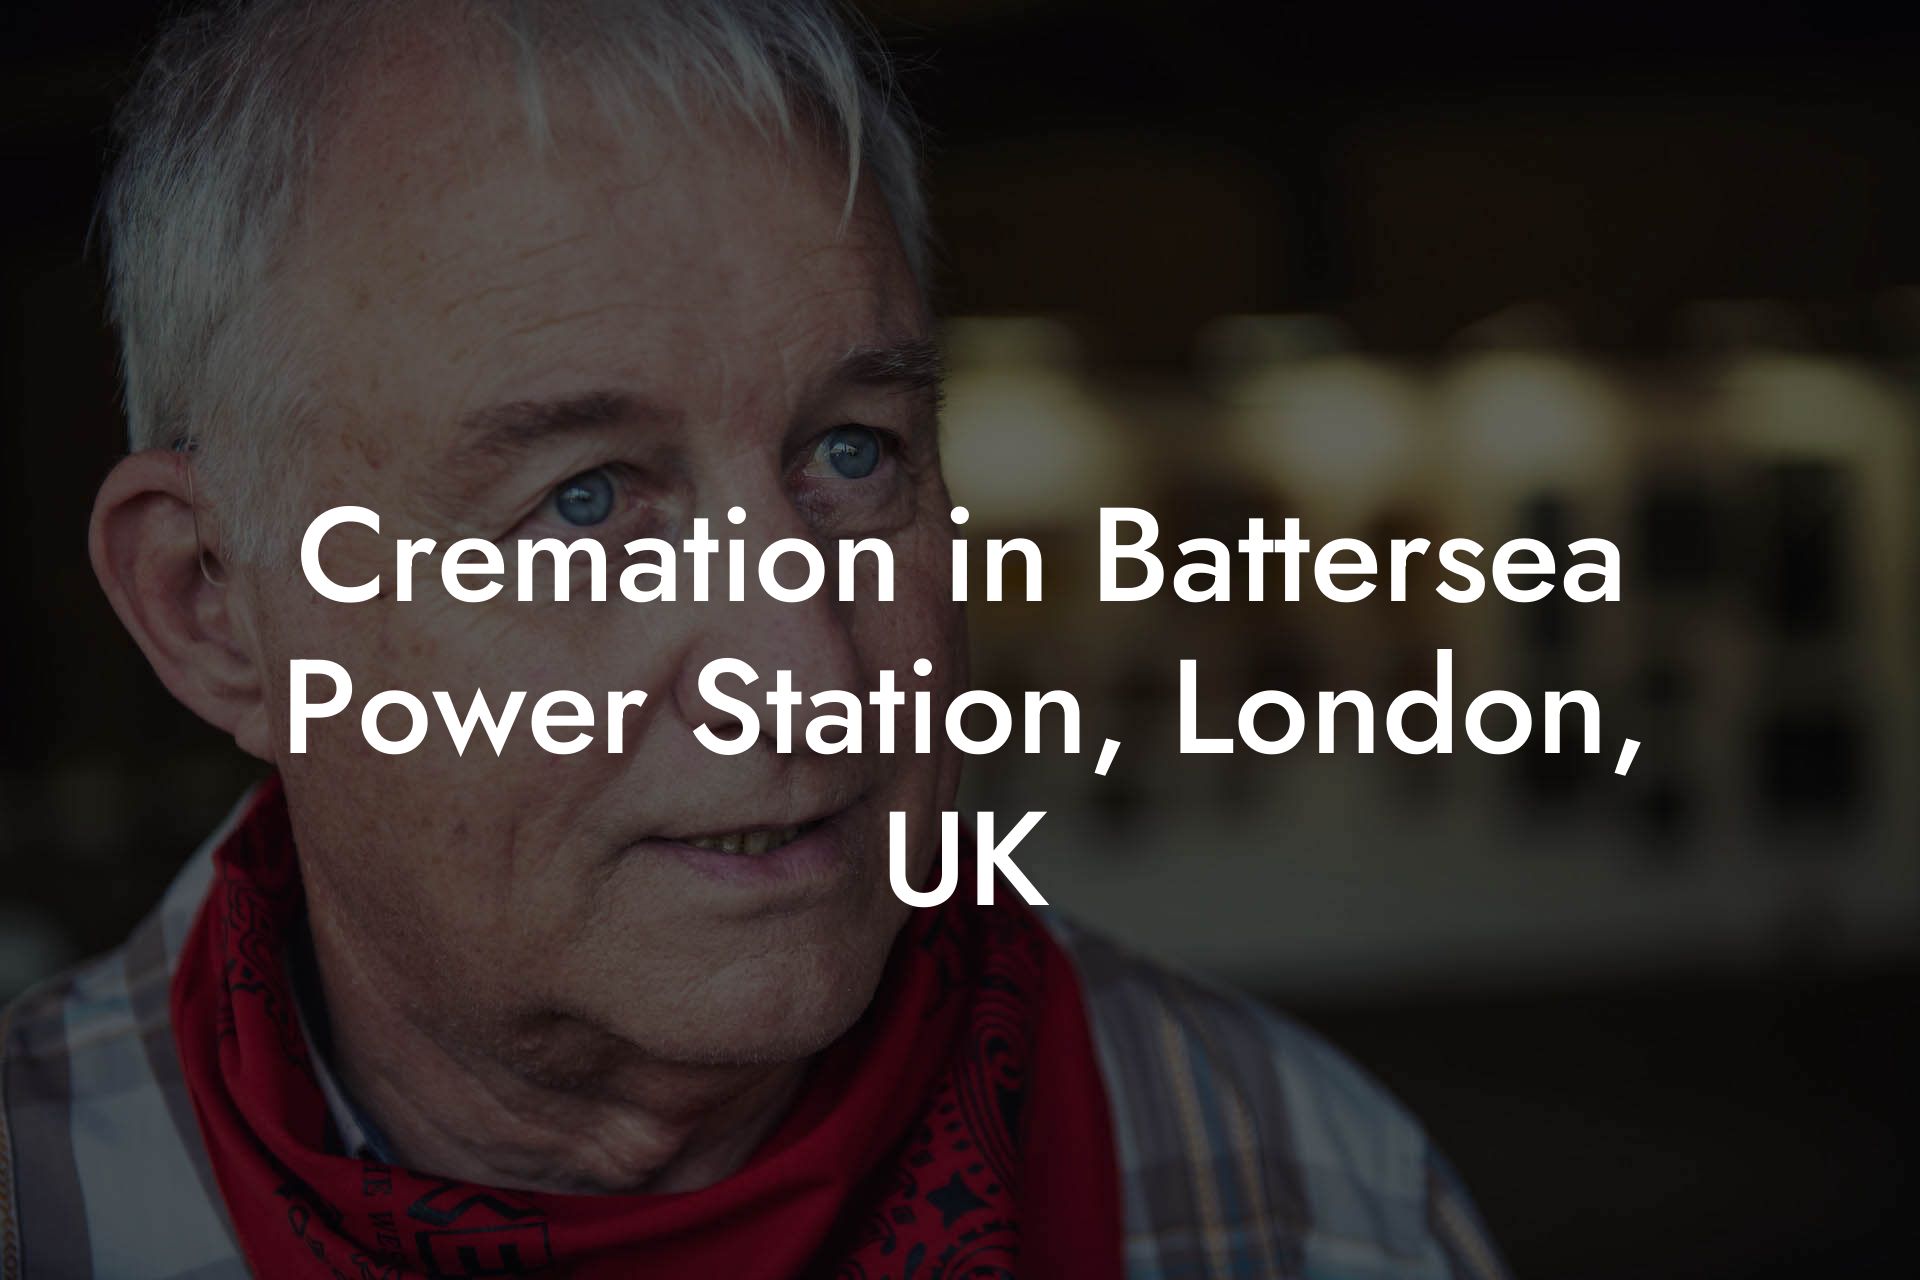 Cremation in Battersea Power Station, London, UK